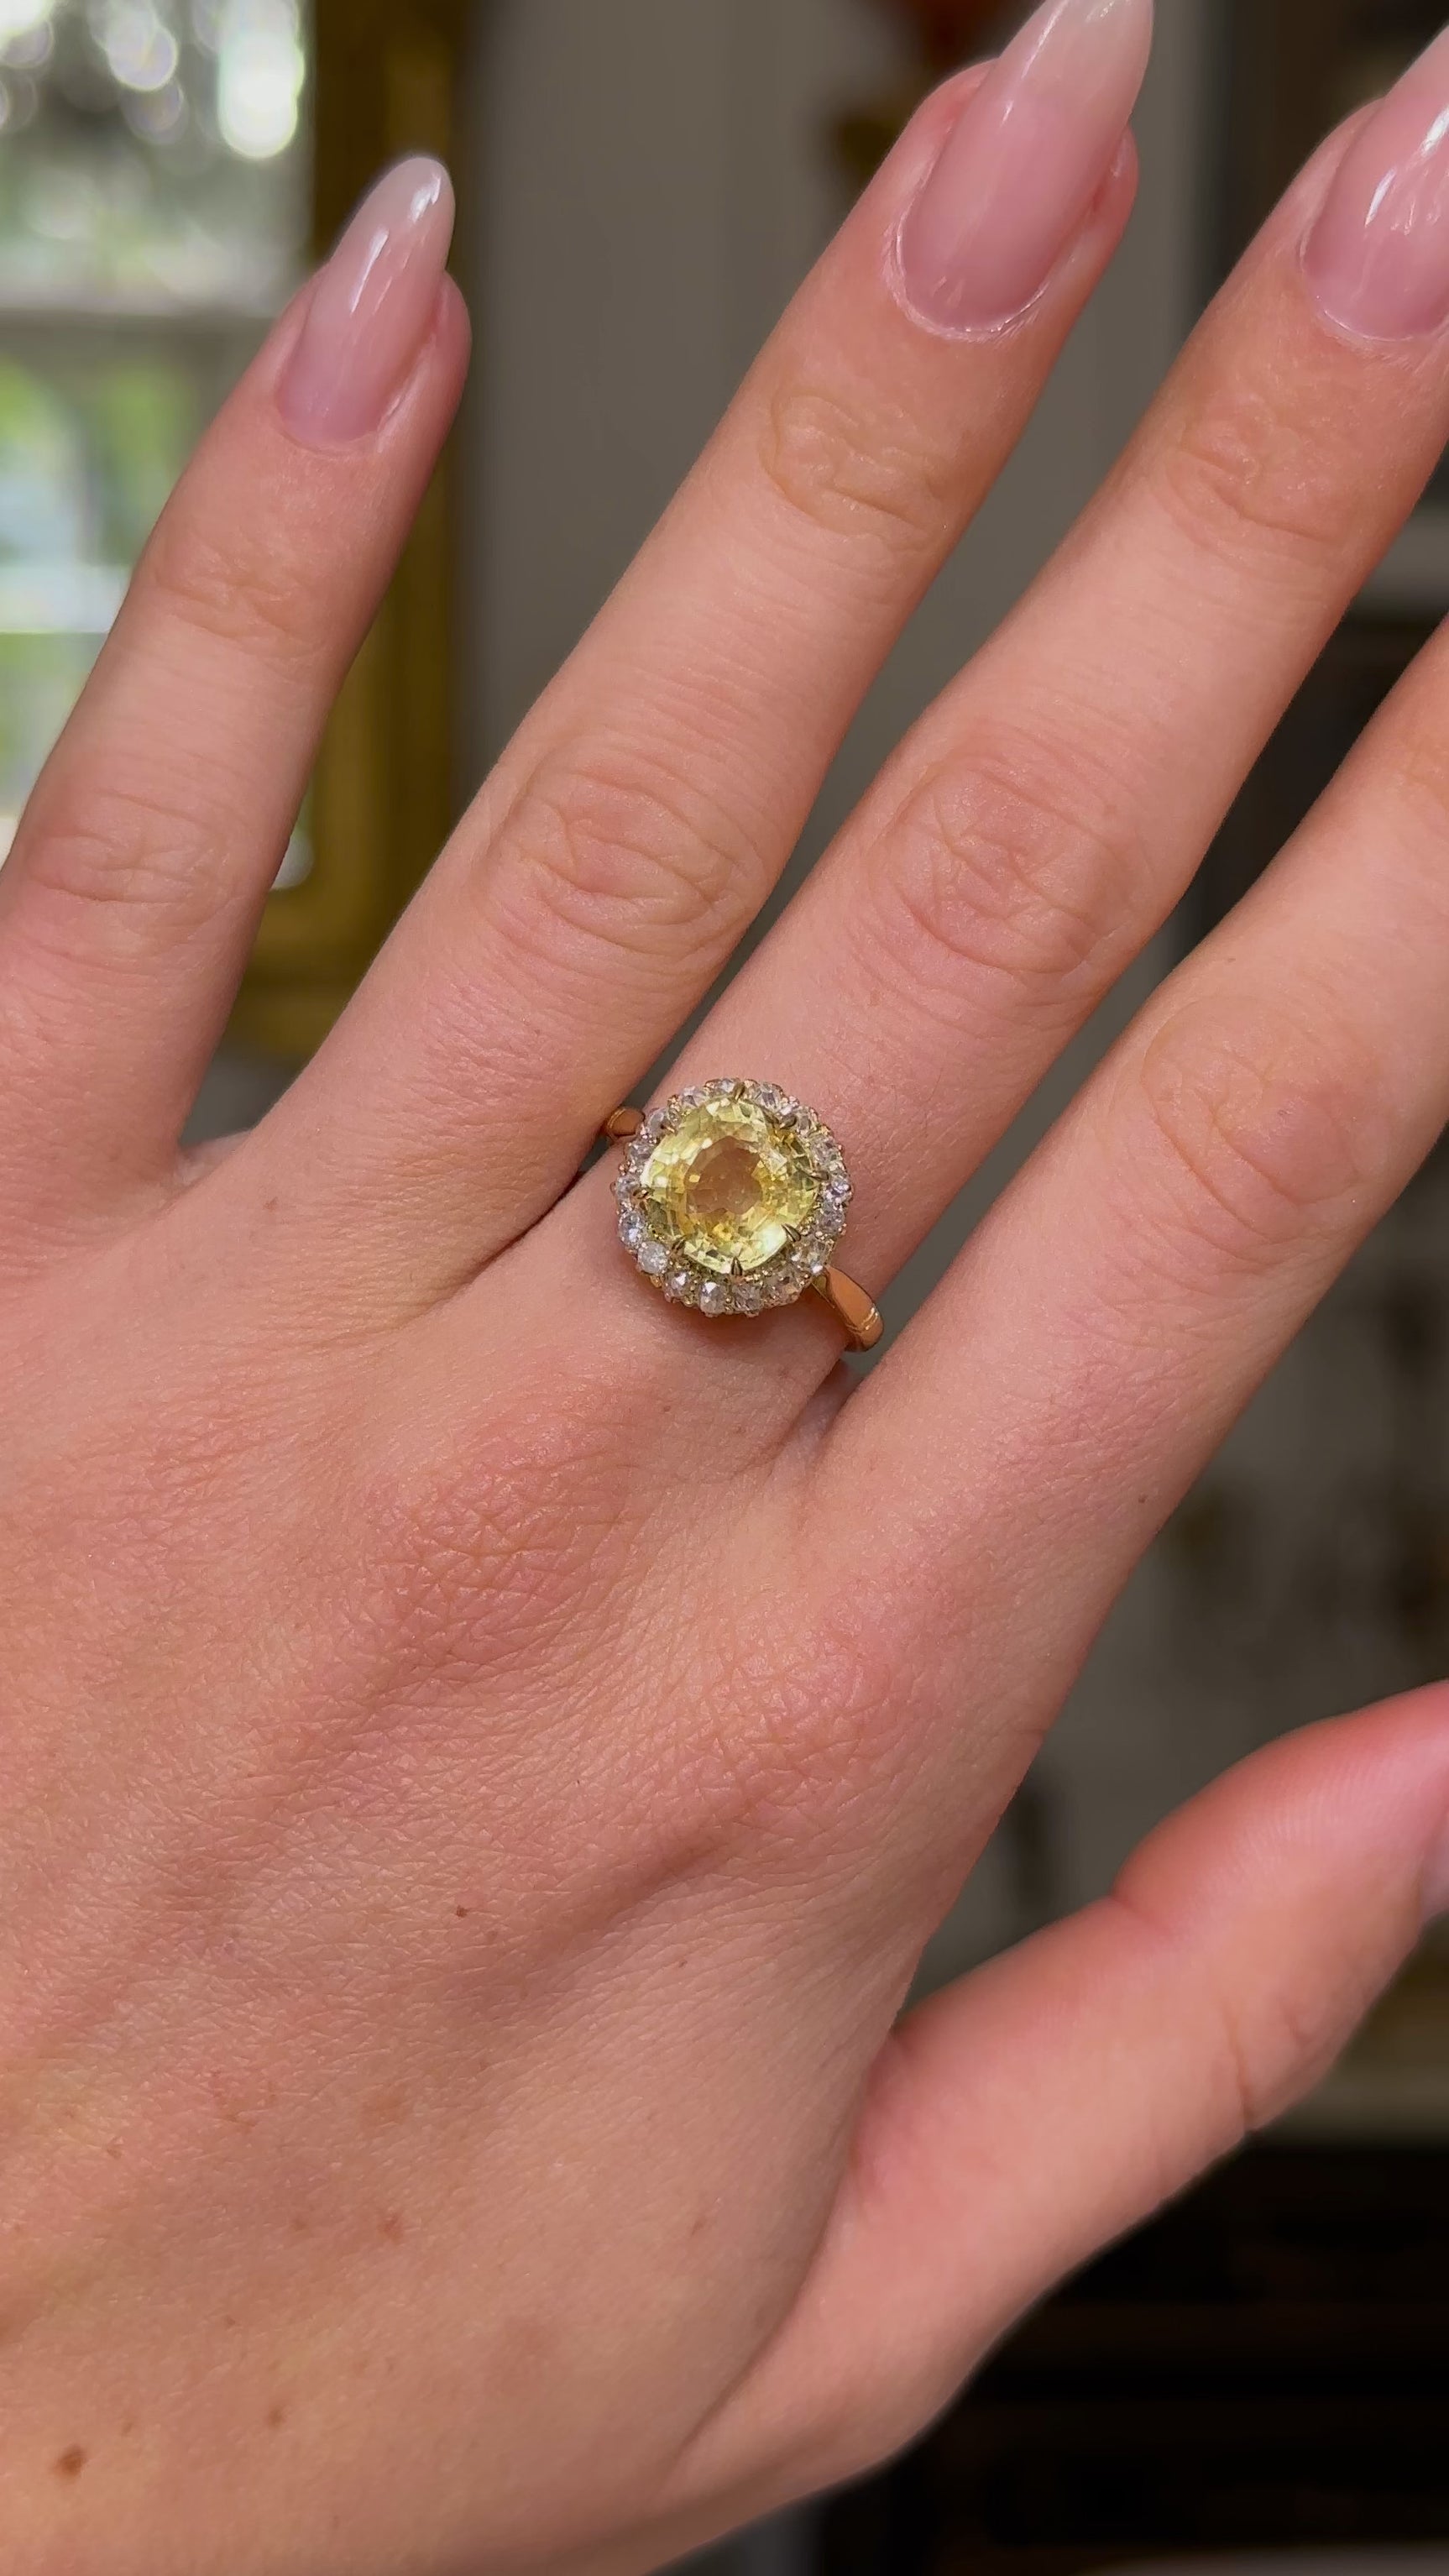 Vintage, Cushion-cut Yellow Sapphire Diamond Cluster Engagement Ring, worn on hand and moved away from lens to give perspective, front view. 